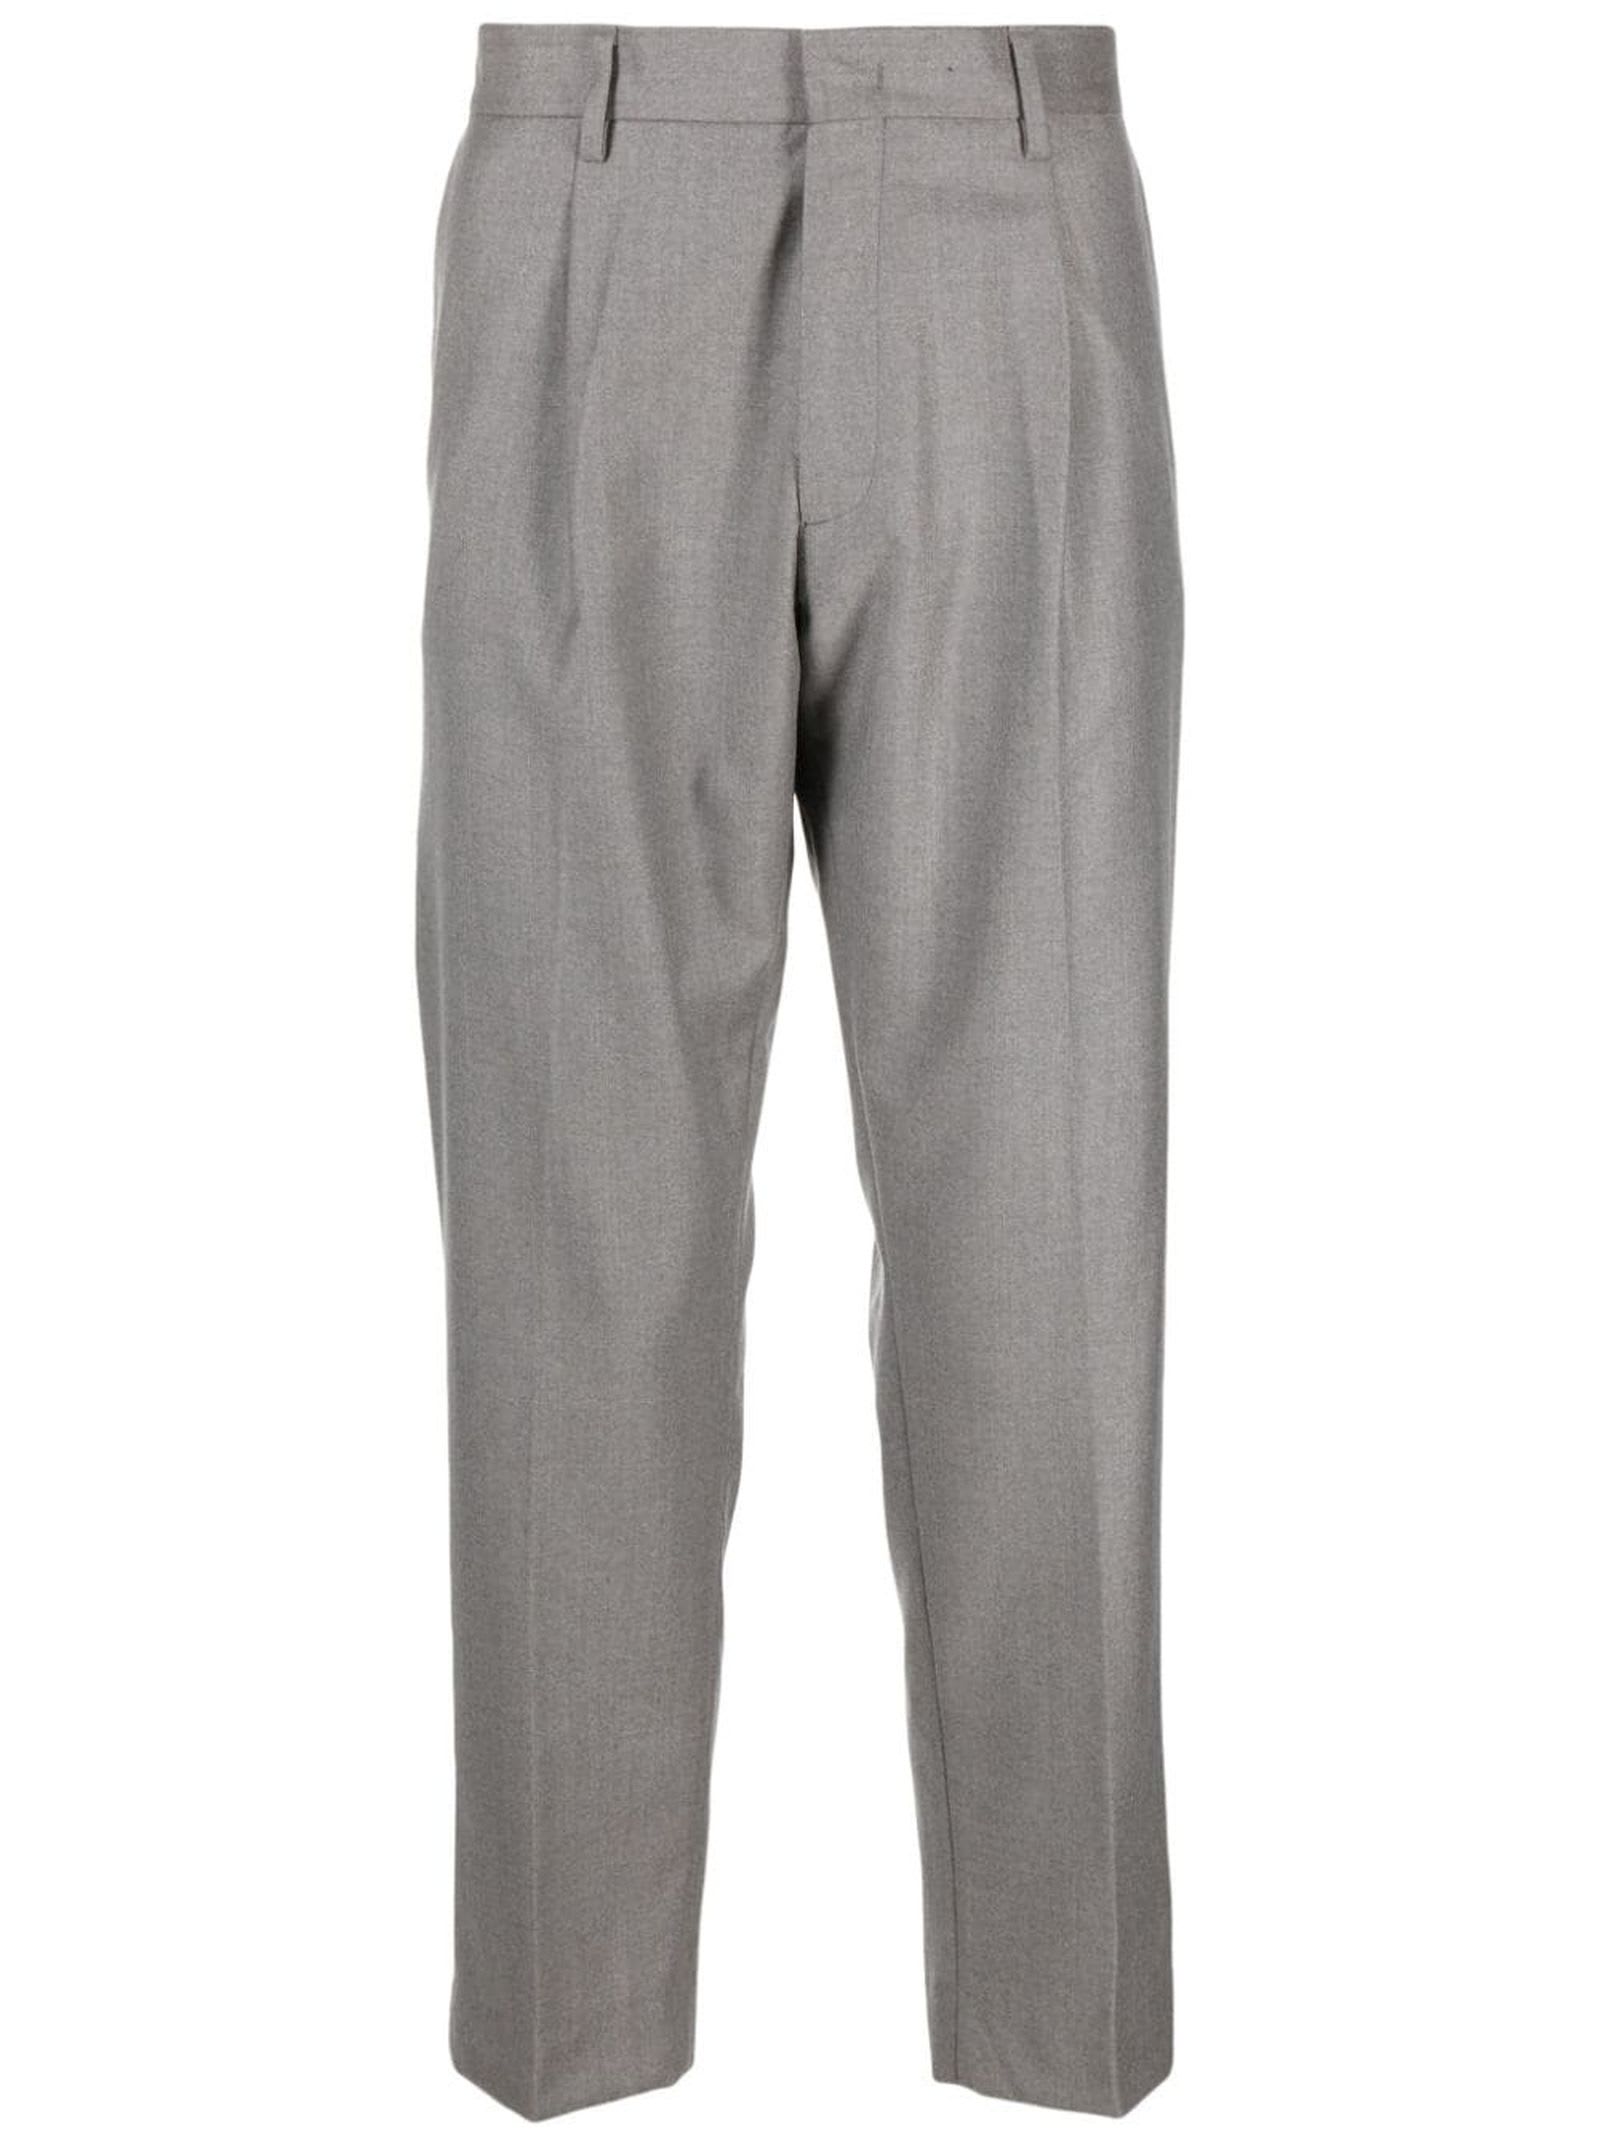 LOW BRAND TAUPE GREY VIRGIN WOOL TROUSERS